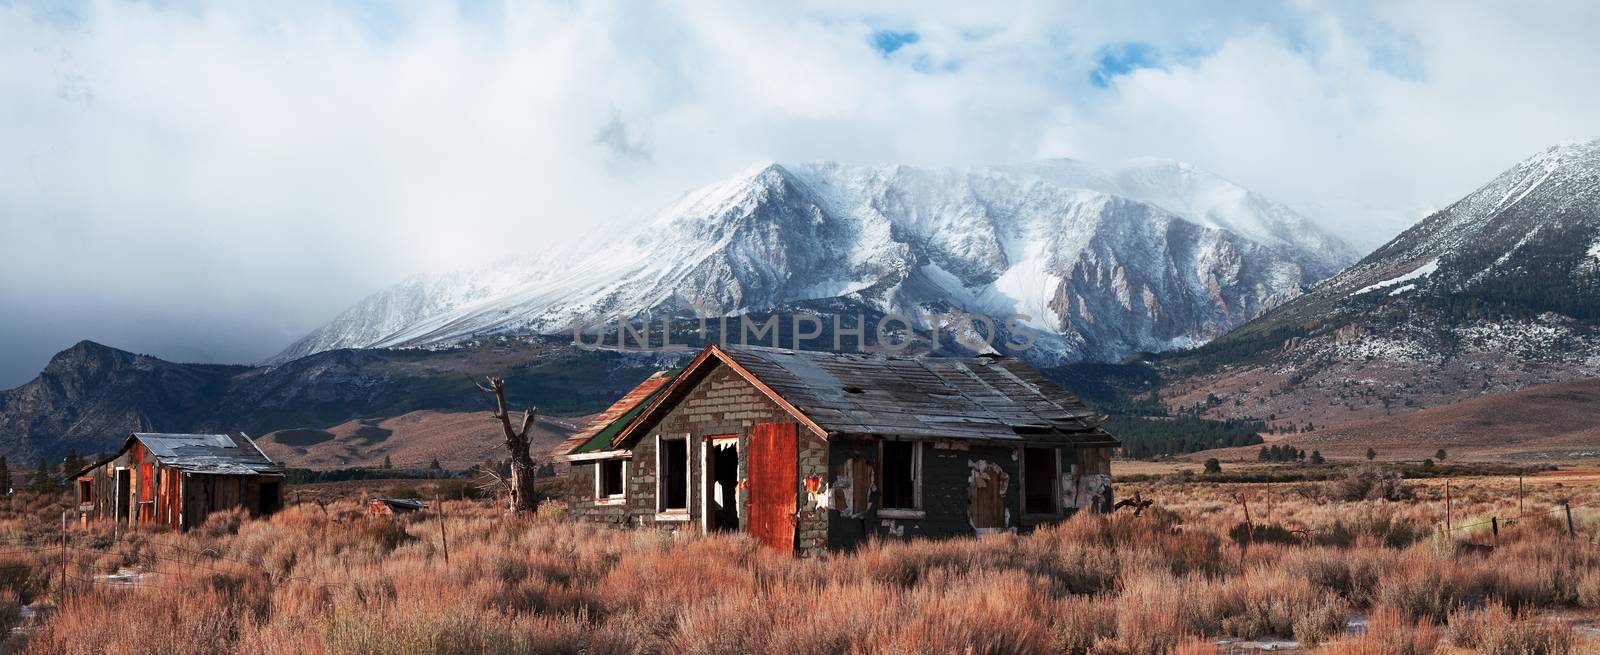 Abandoned House in Highway 395 by adonis_abril